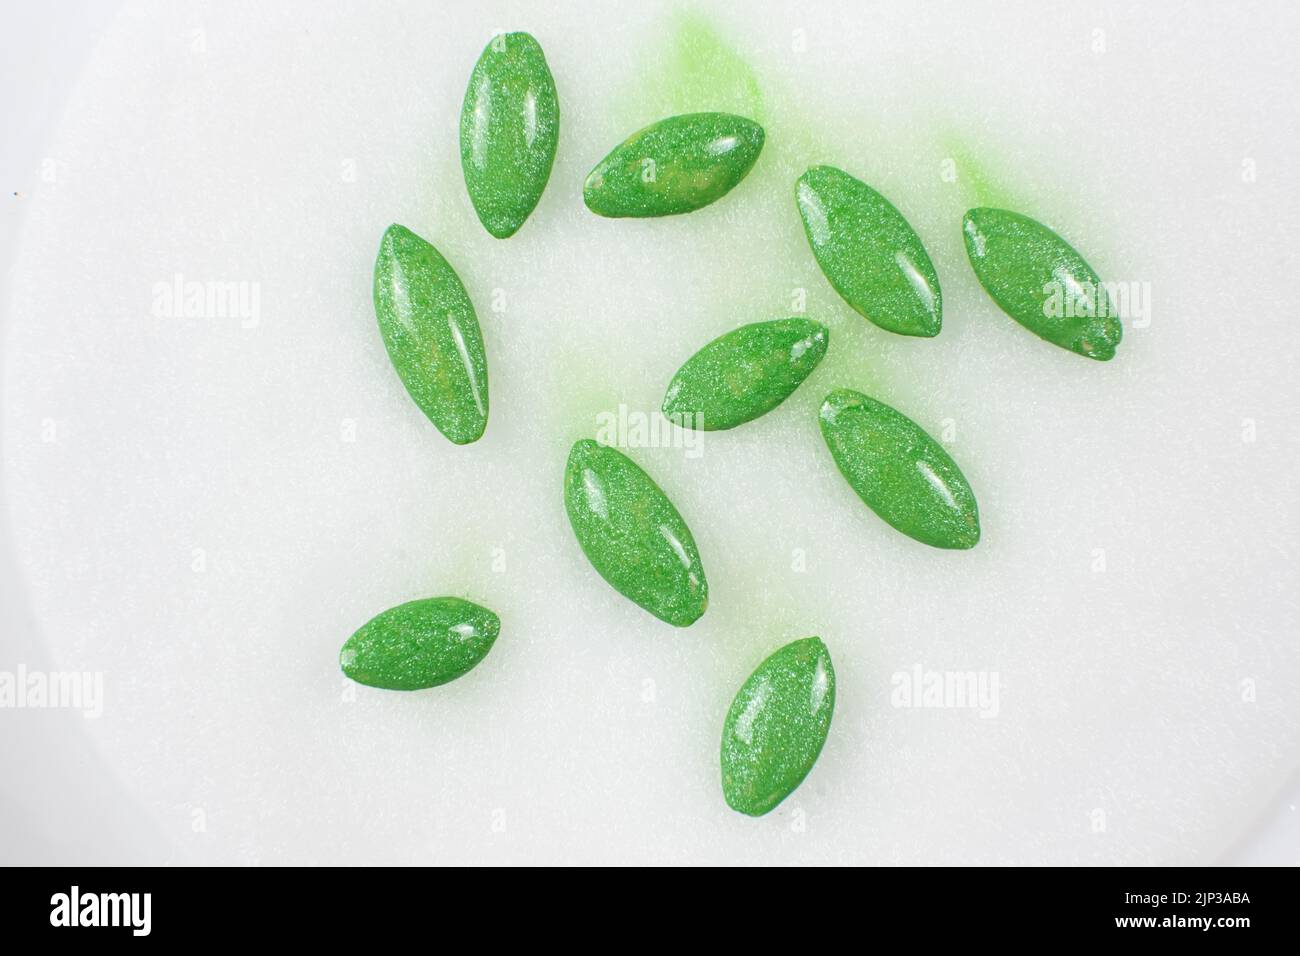 Growing cucumbers from seeds. Step 1 - Soaking the seeds on a cotton pad. Stock Photo